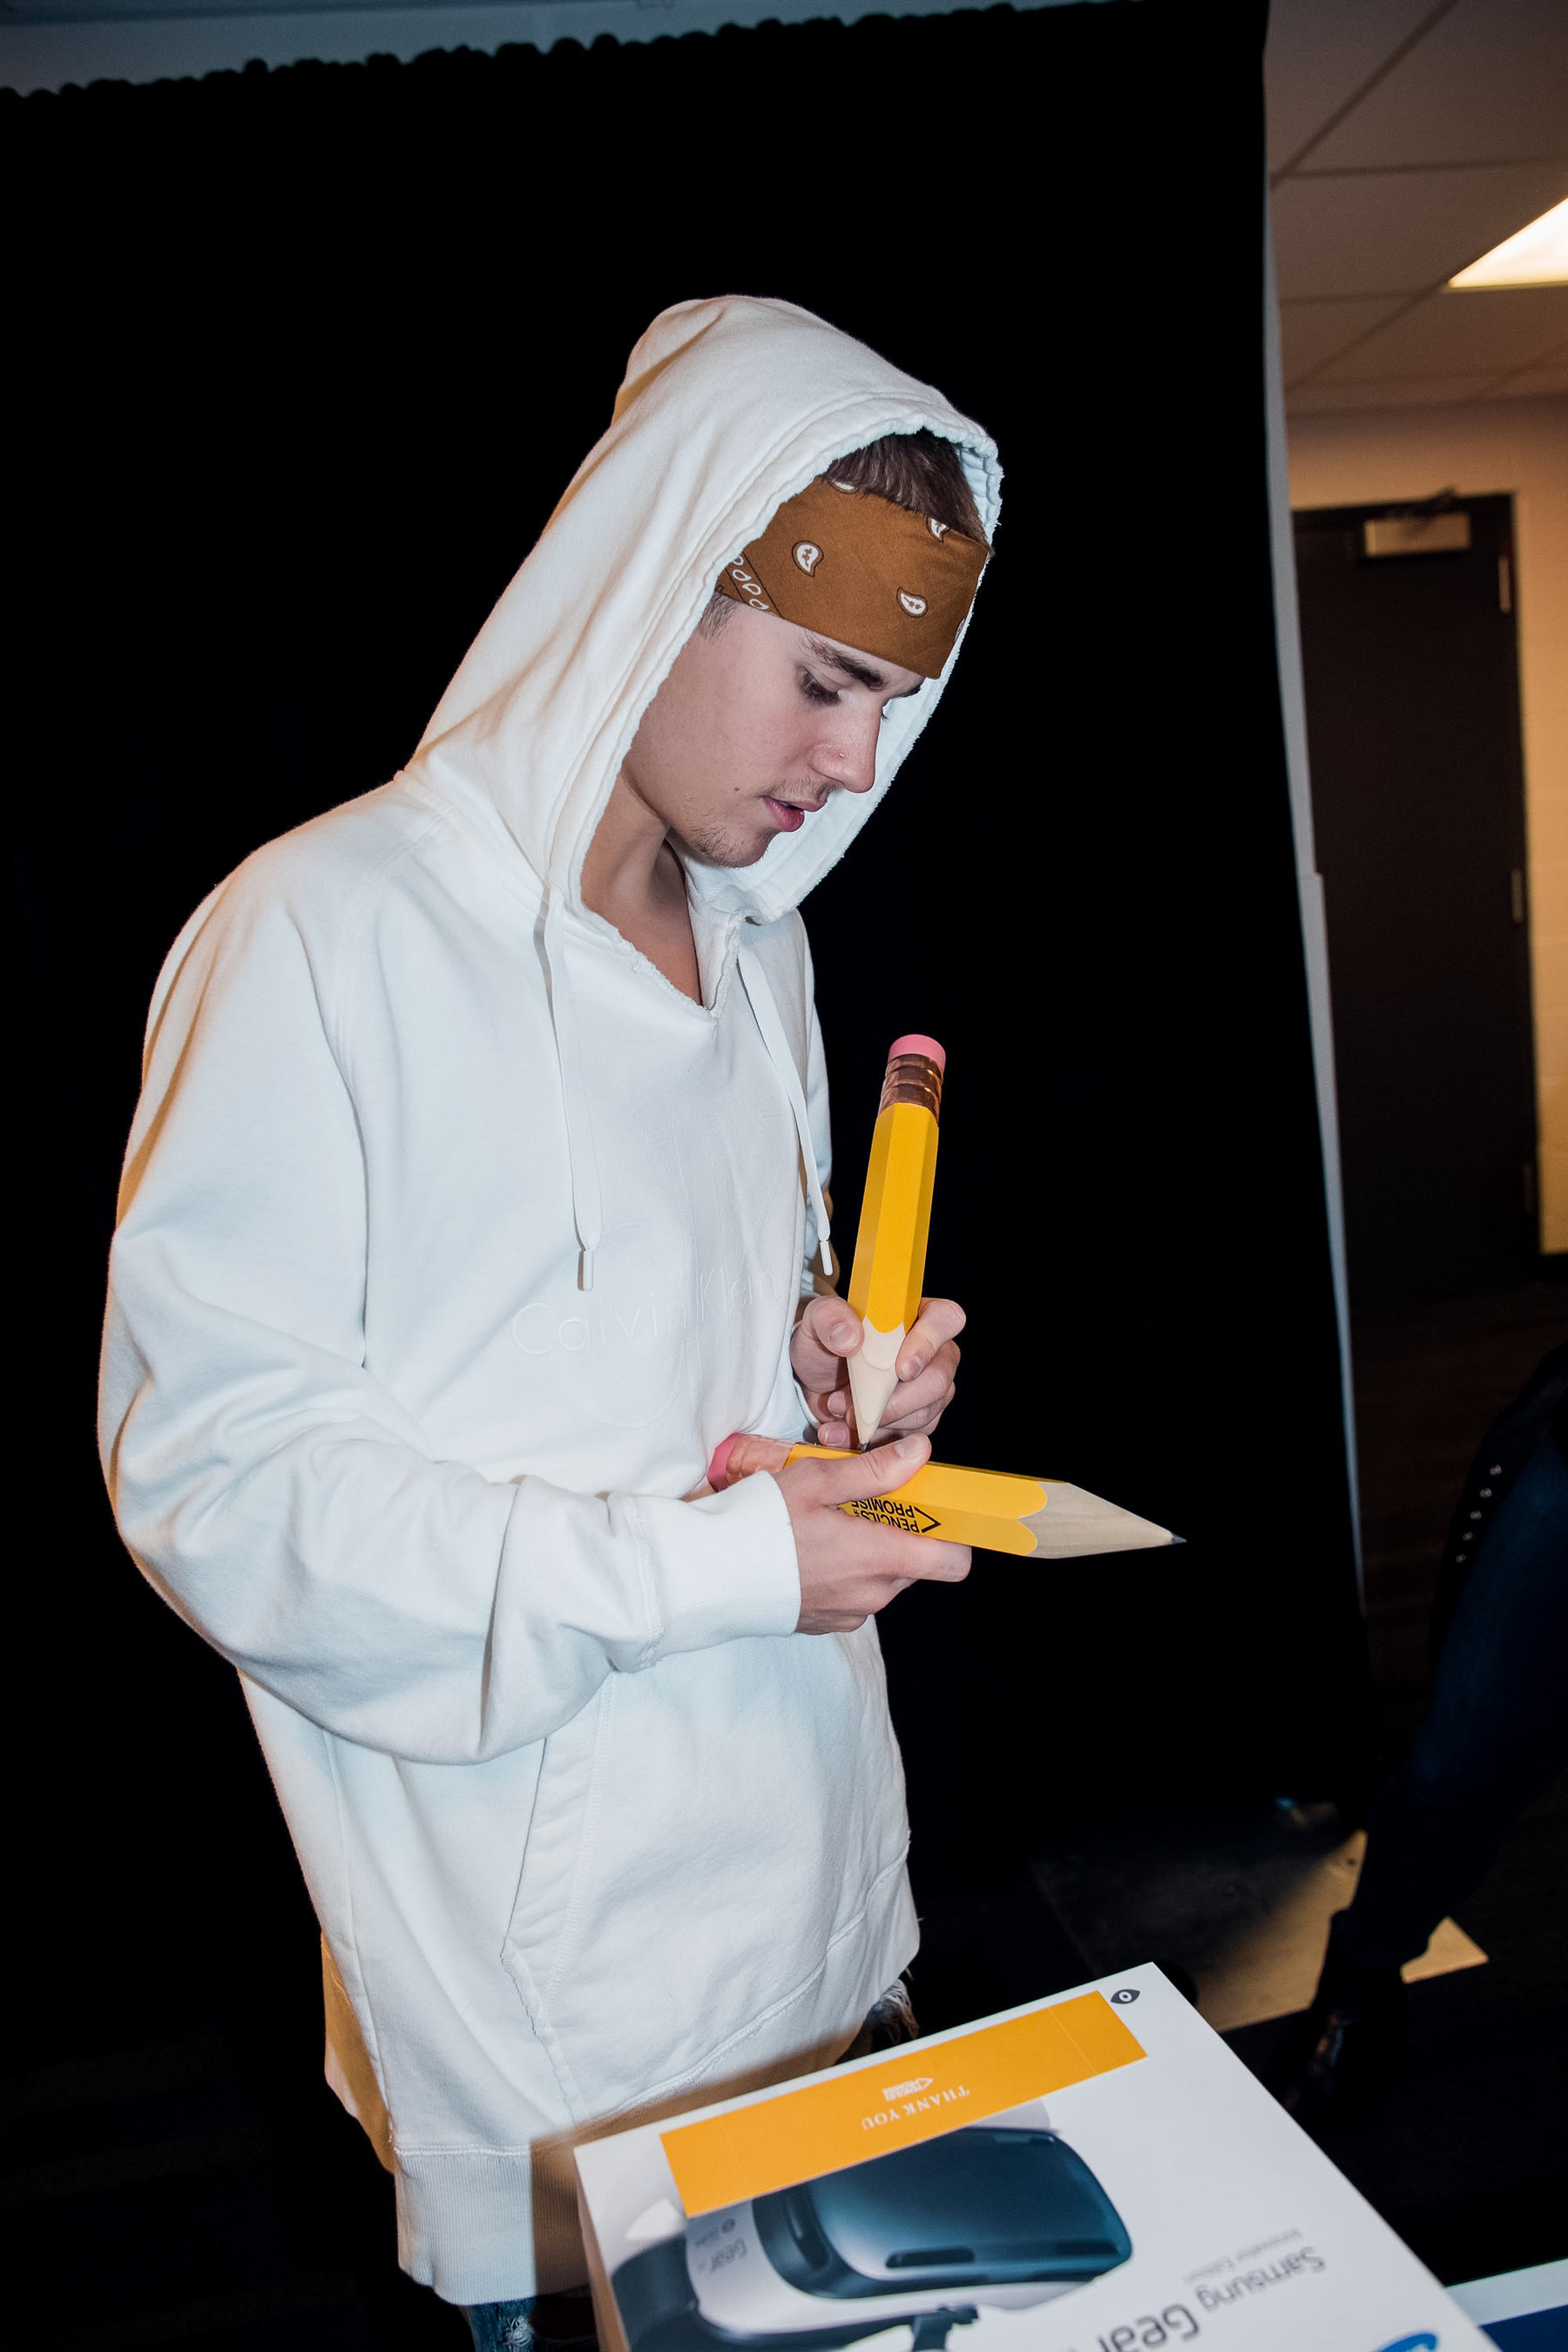 Pencils of Promise honors Justin Bieber as First-Ever PoP Global Ambassador just prior to his sold out show at the Barclays Center in Brooklyn, New York on May 4. (Credit: Rory Kramer)